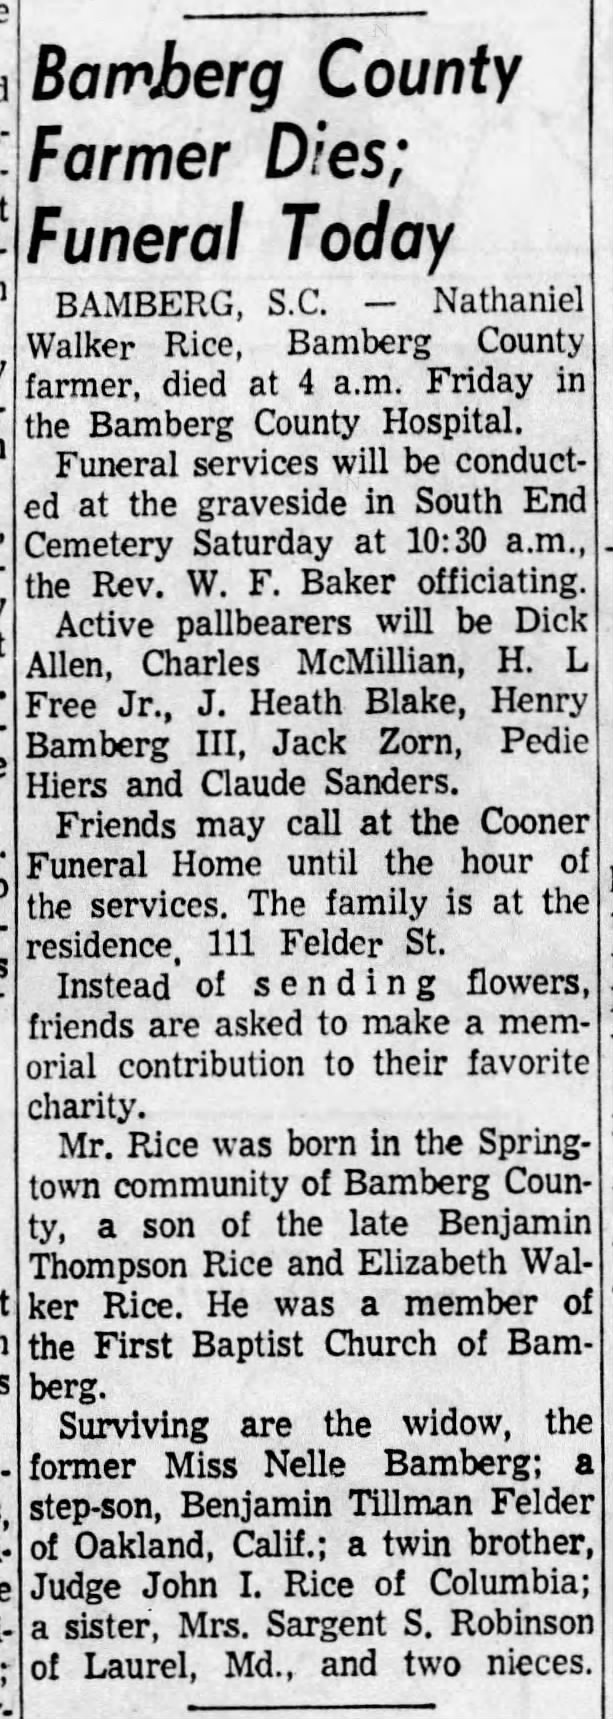 Bamberg County Farmer Dies Funeral Today (Saturday, 6 October 1962, page 10, column 2)